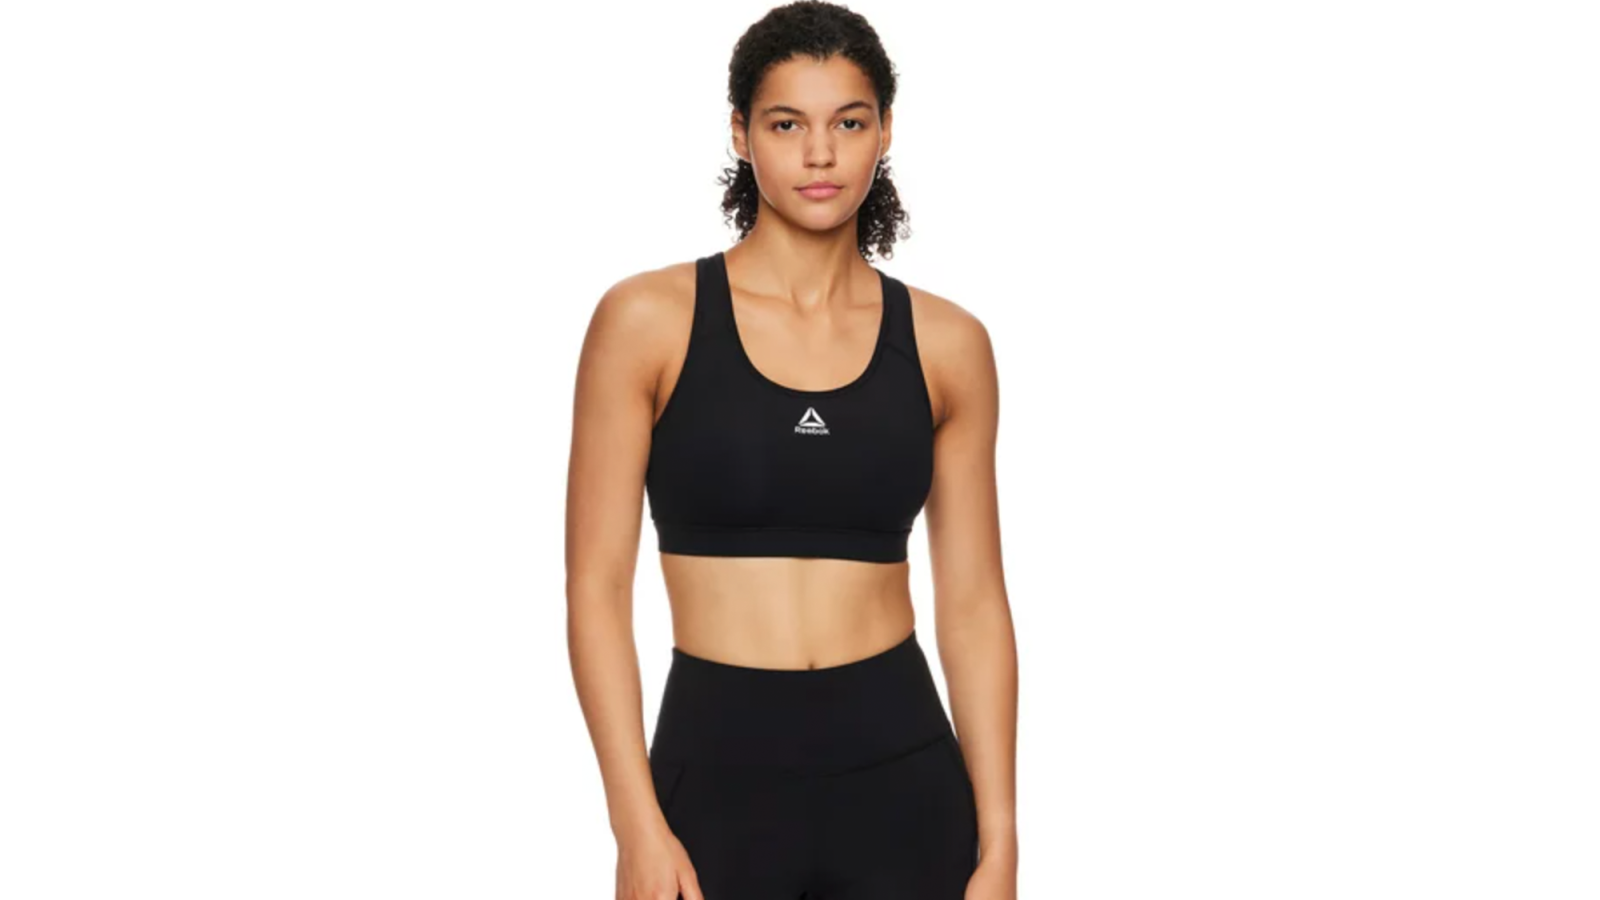 This 'Comfortable' Reebok Sports Bra Is Only $16 at Walmart